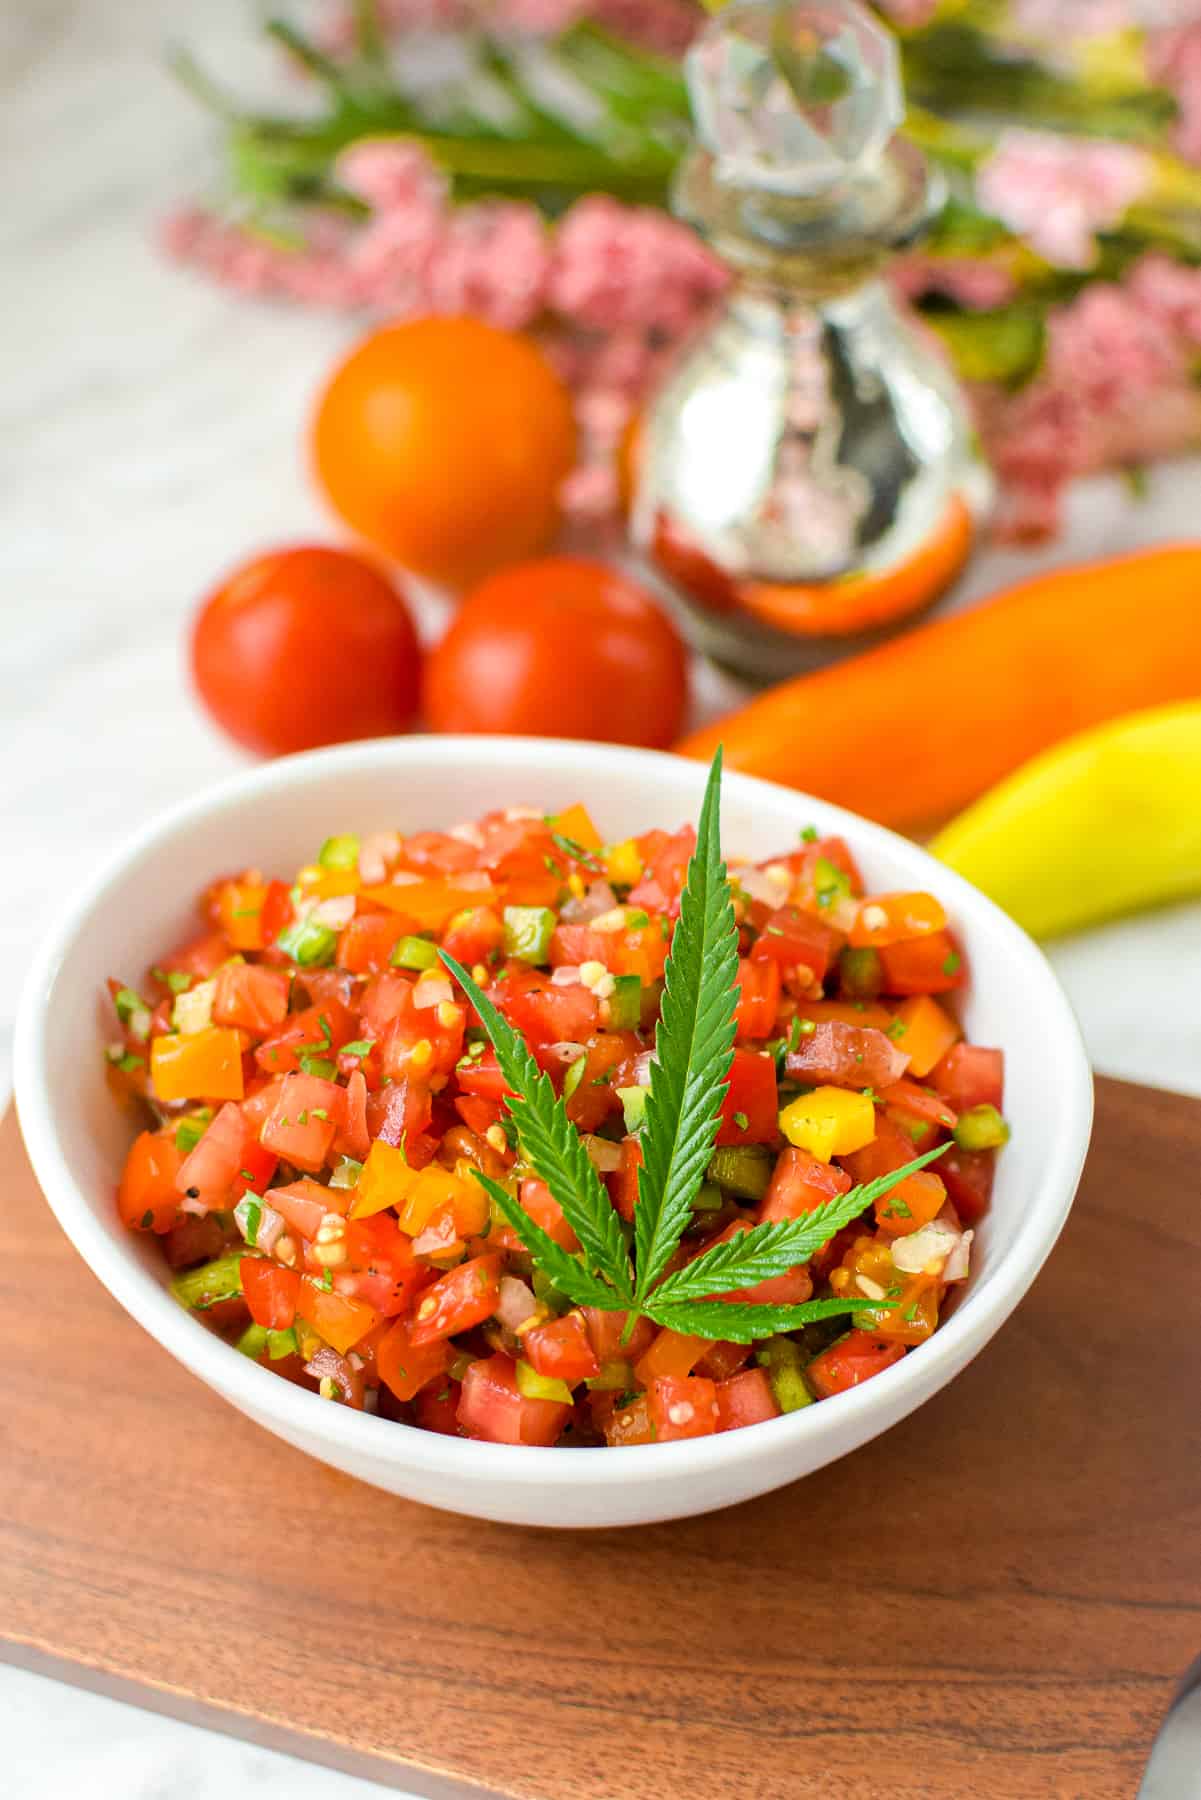 A finished bowl of cannabis infused salsa garnished with a cannabis fan leaf